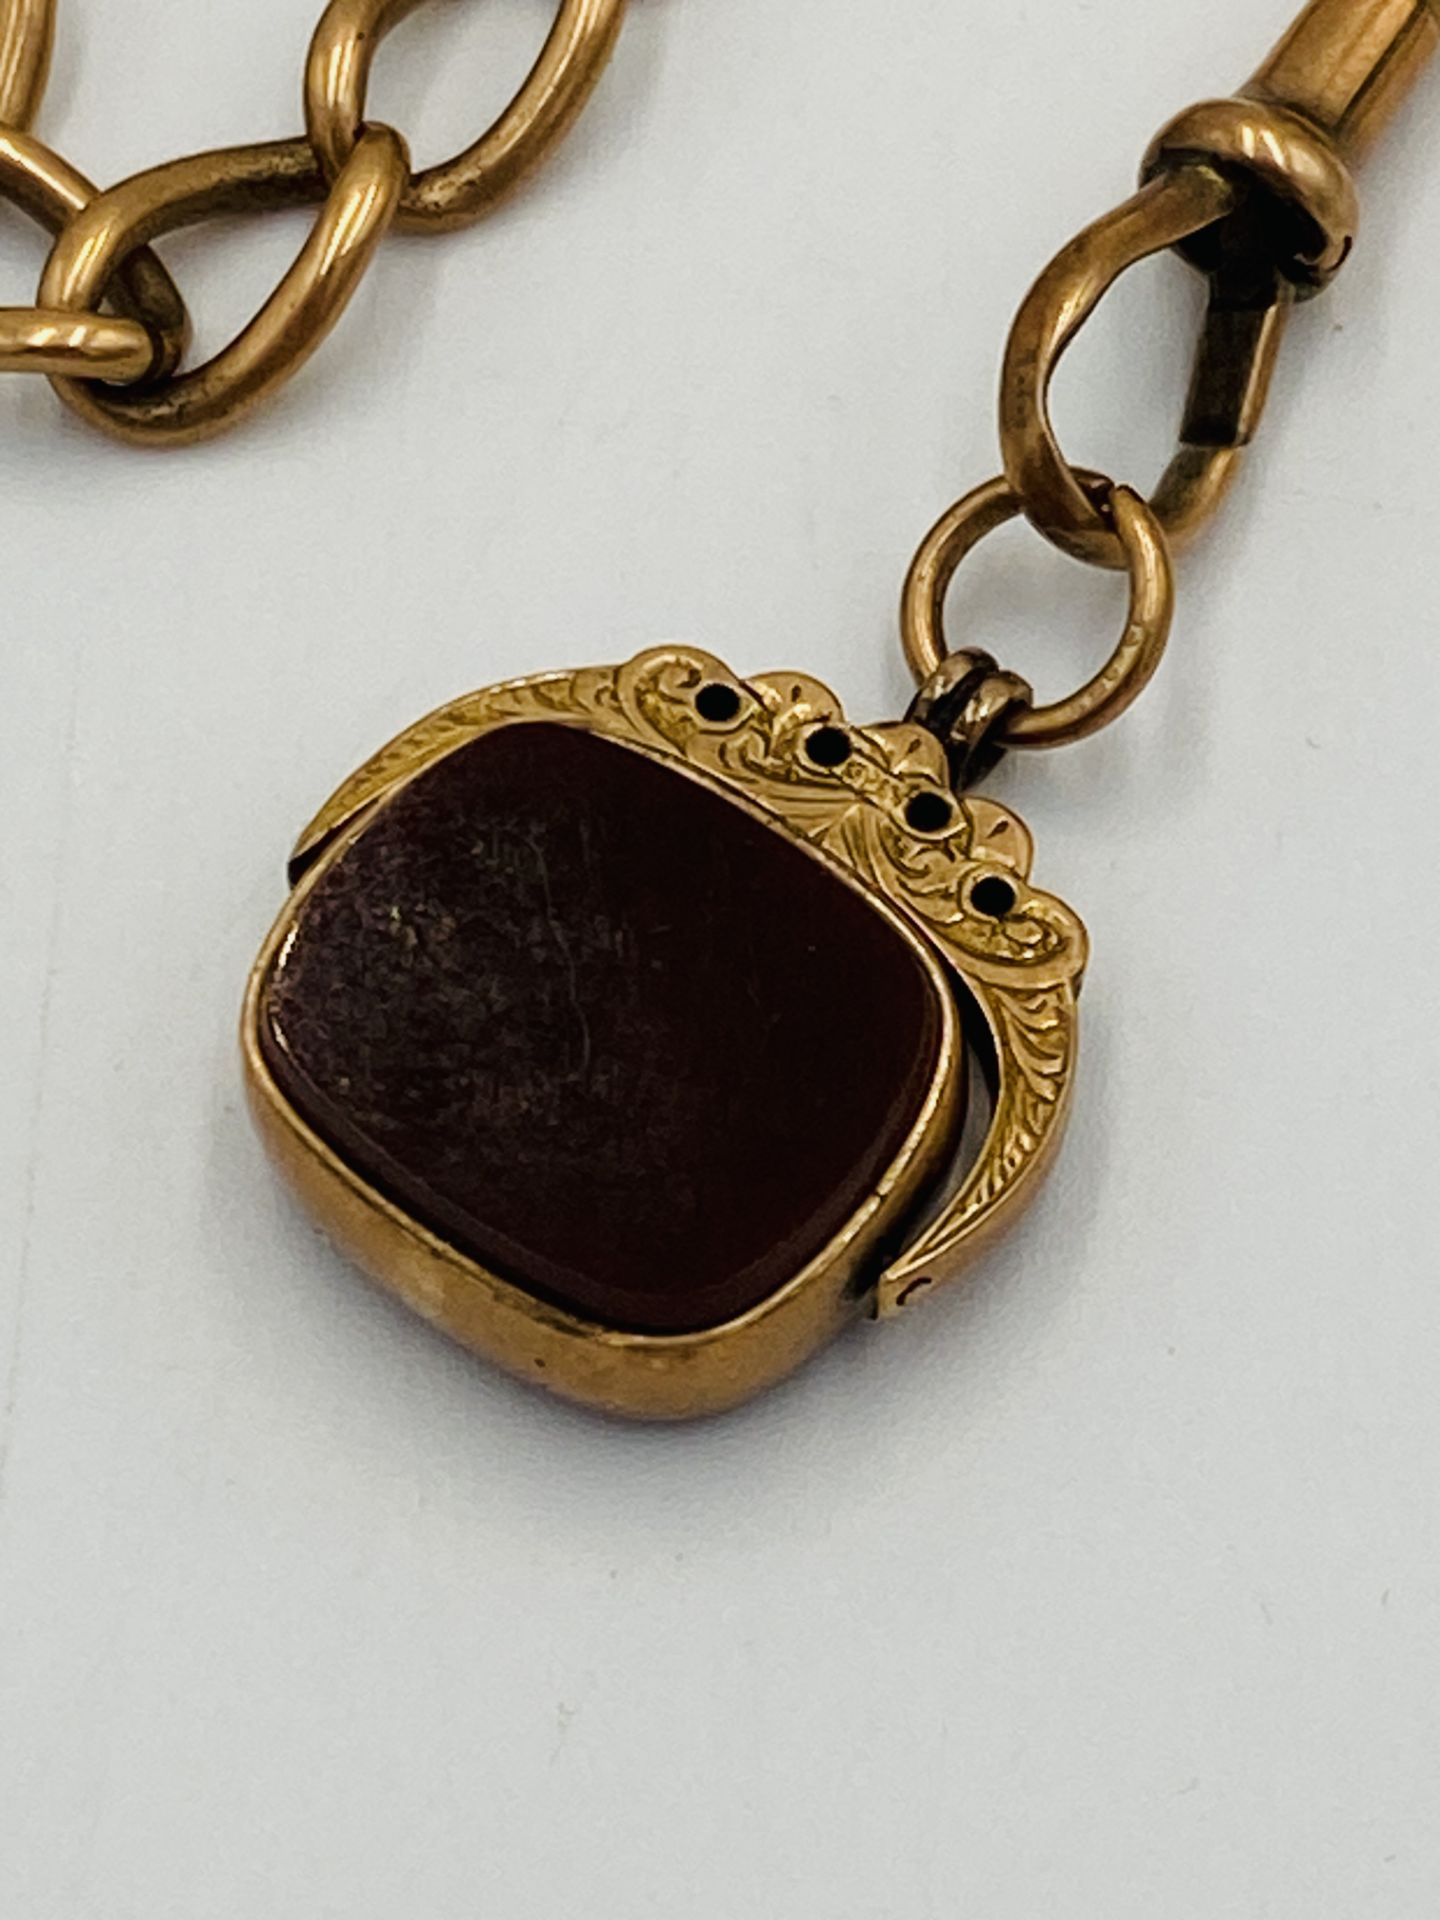 9ct gold fob chain with two fobs - Image 2 of 7